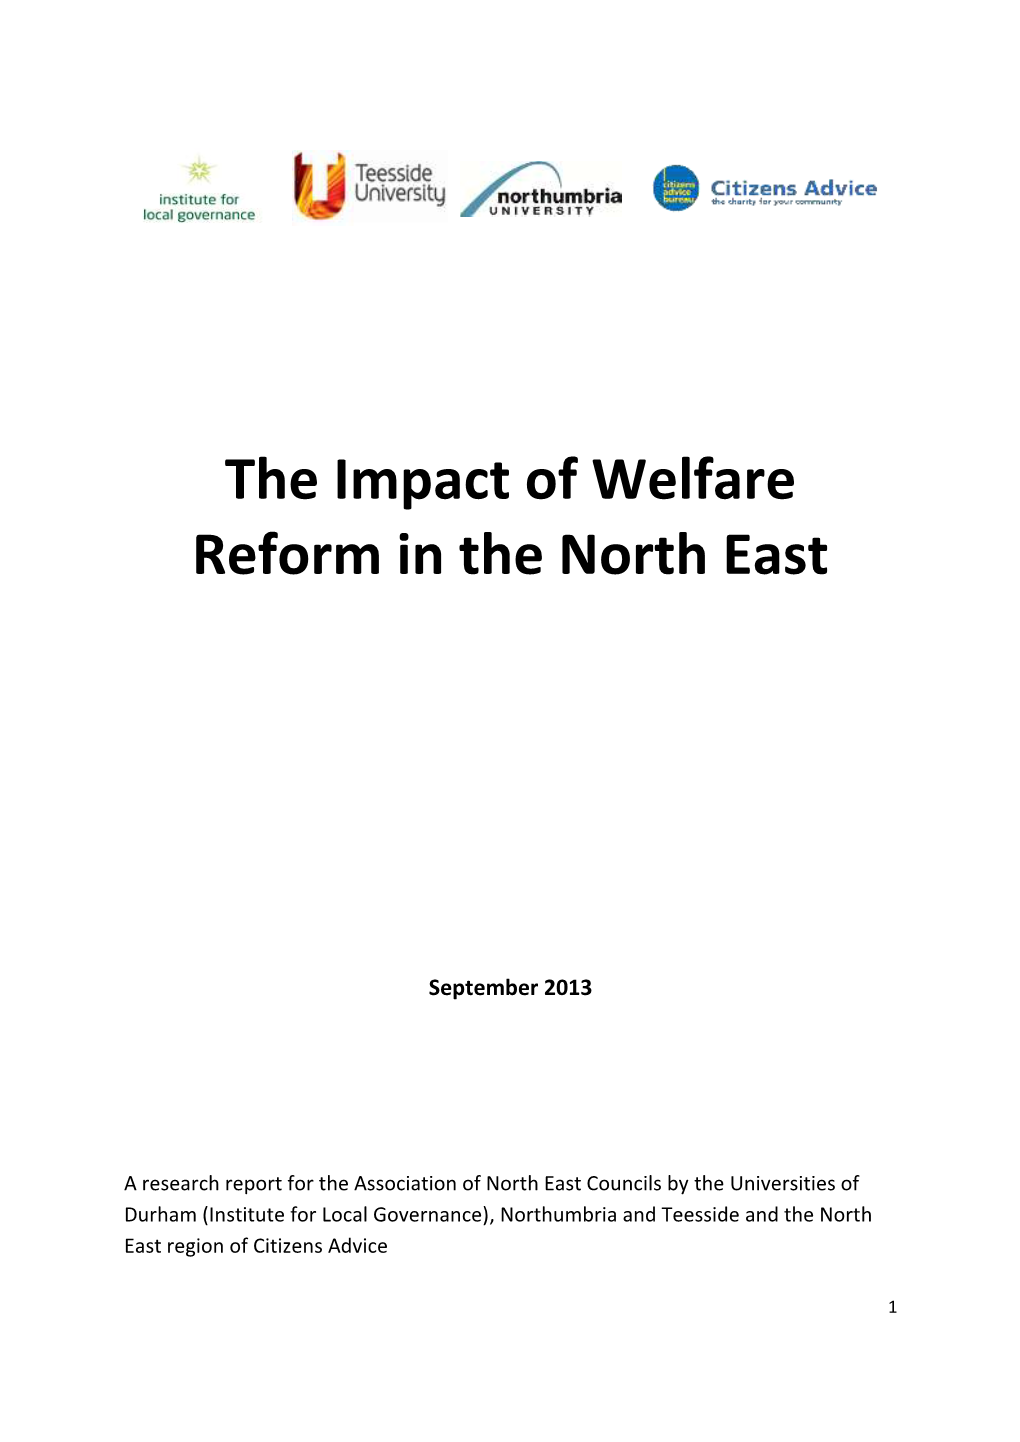 The Impact of Welfare Reform in the North East